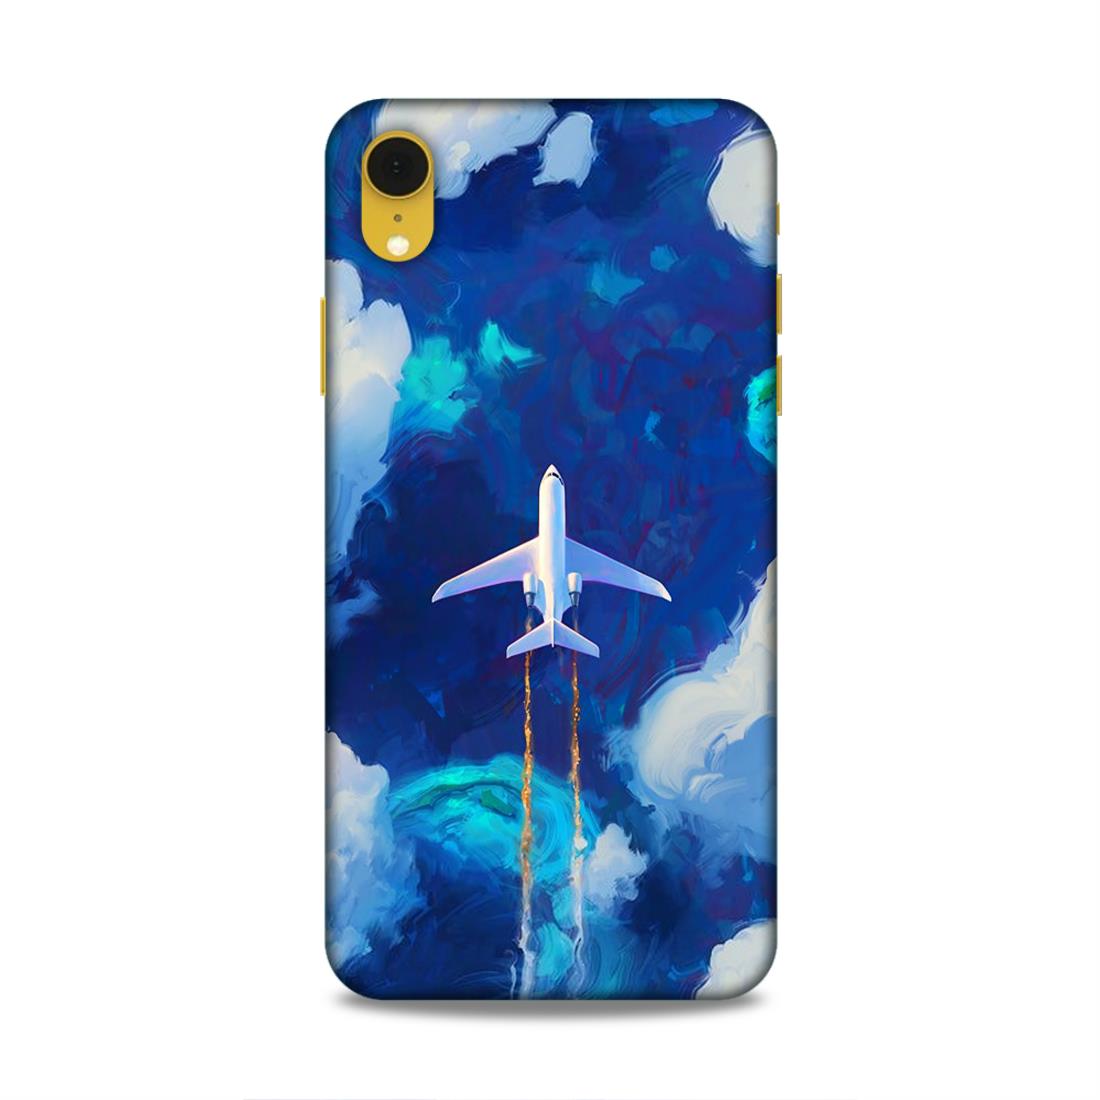 Aeroplane In The Sky Hard Back Case For Apple iPhone XR